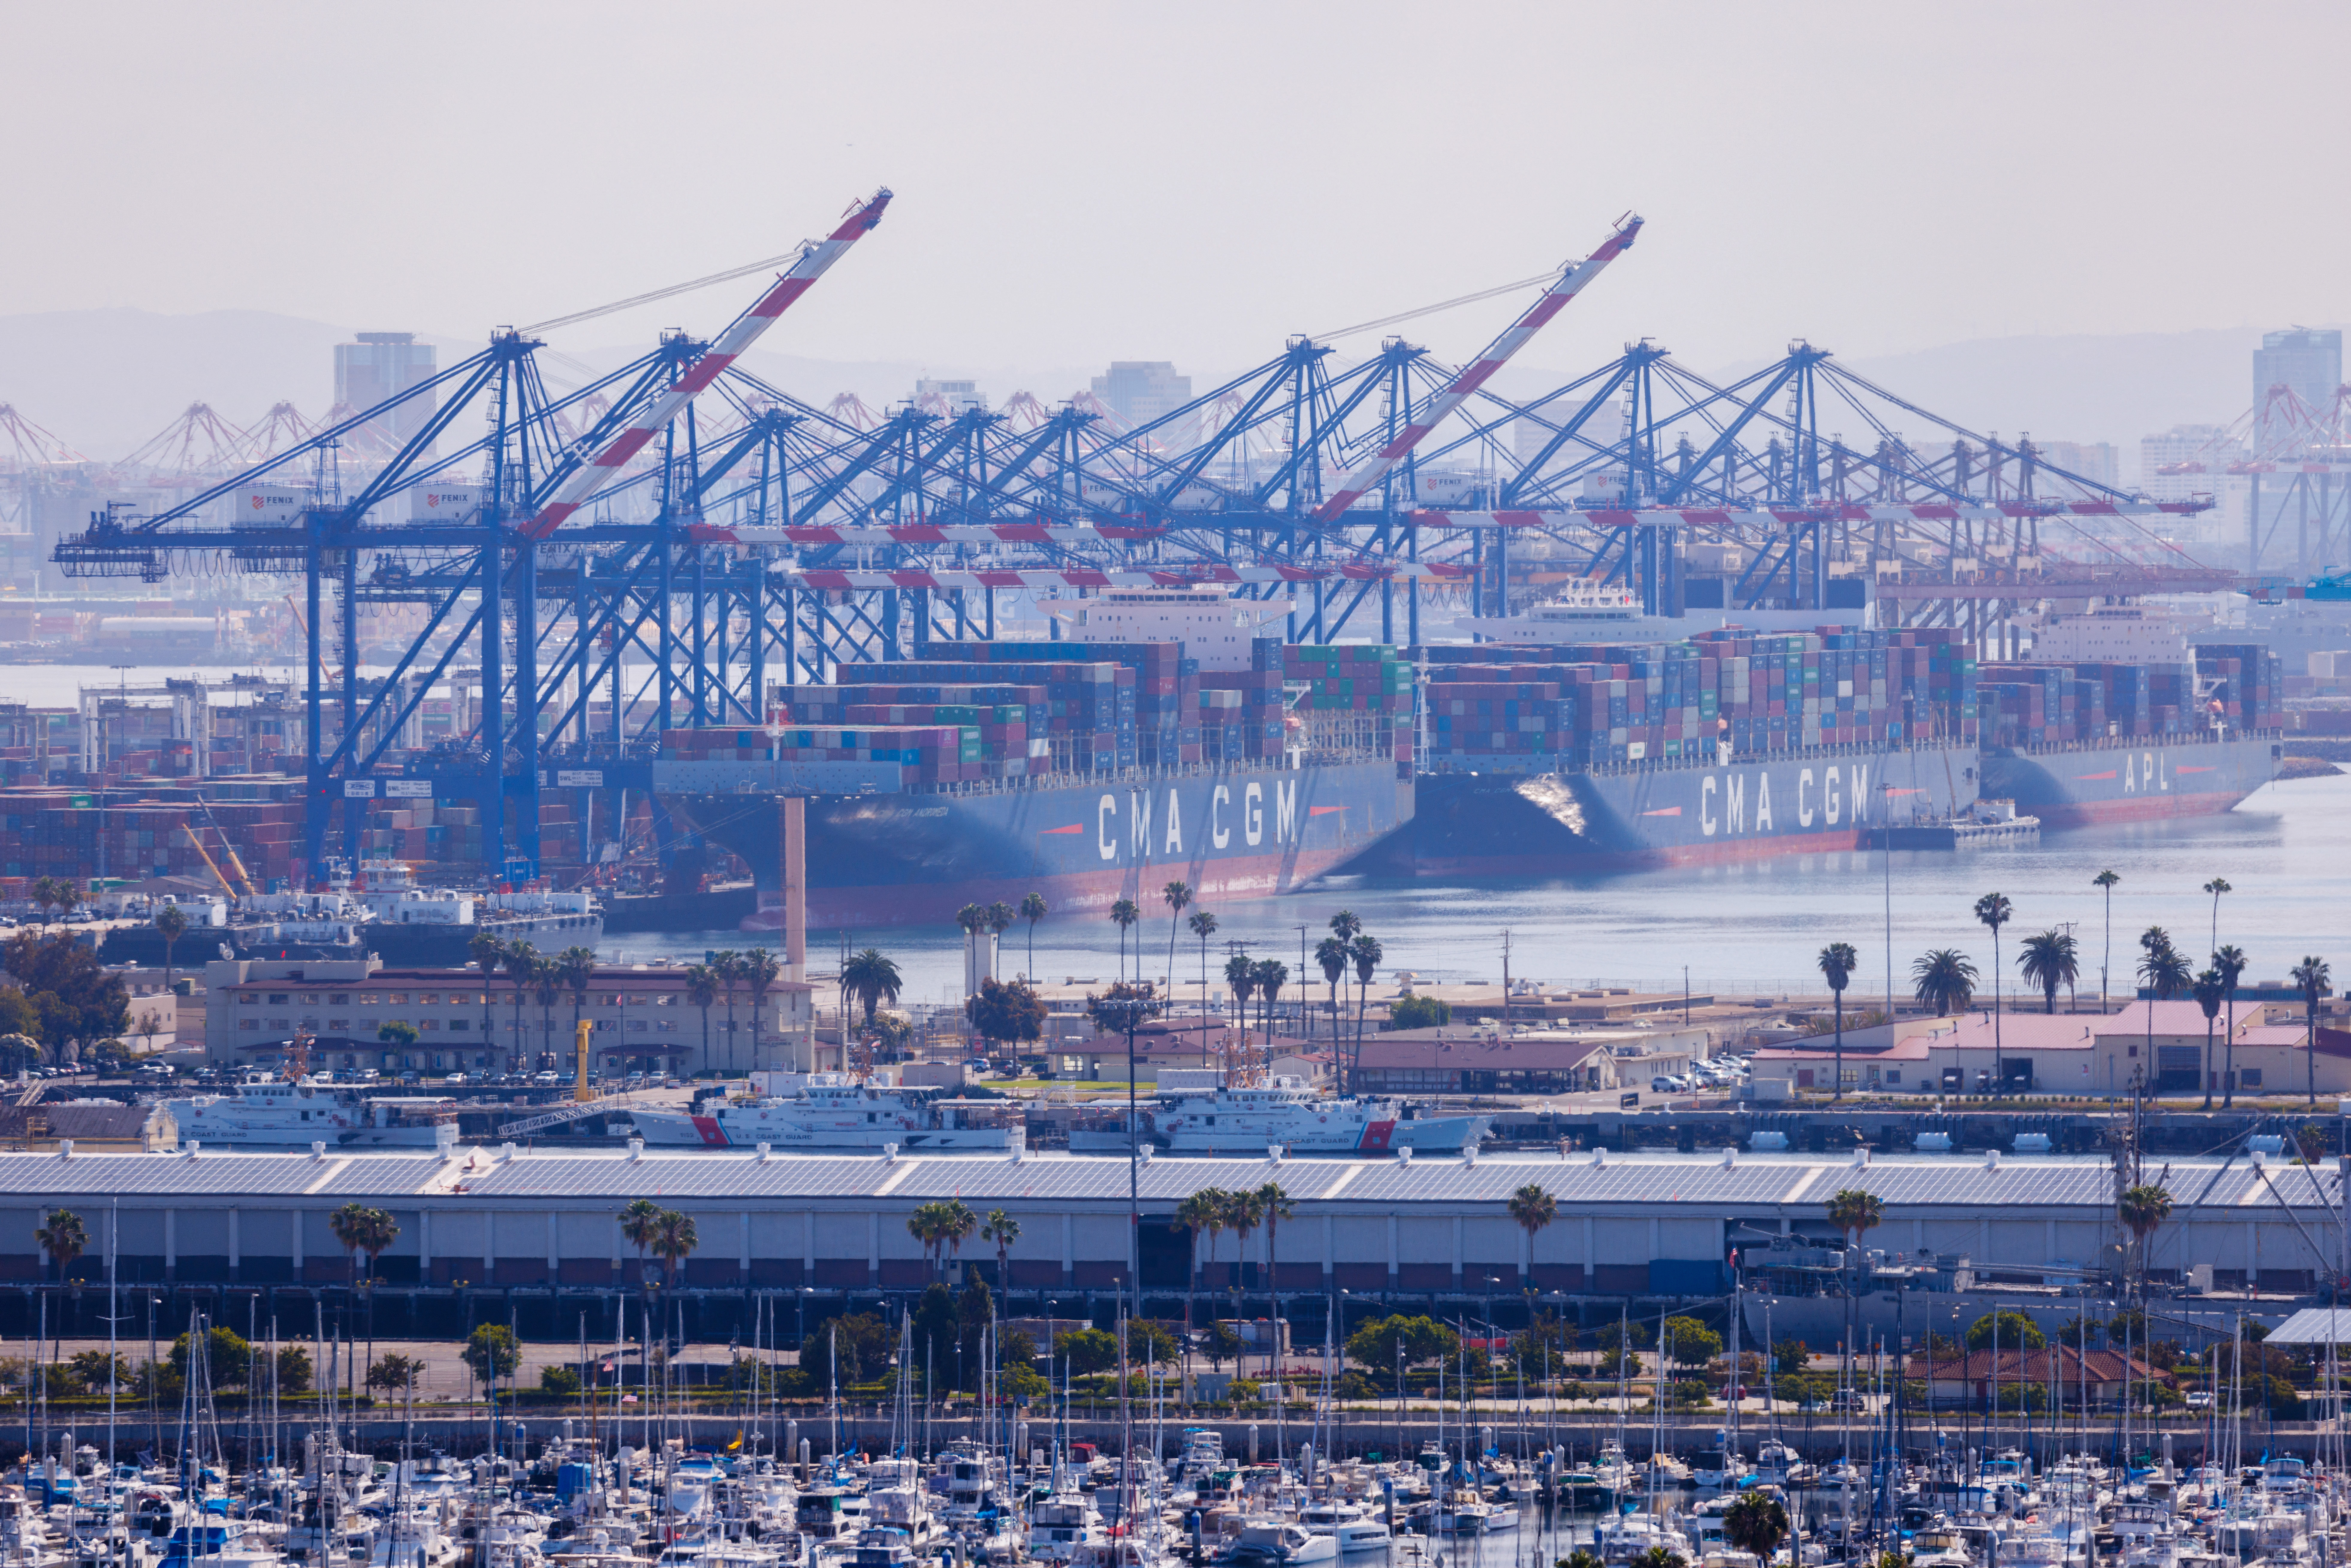 Containships are shown at the Port of Los Angeles